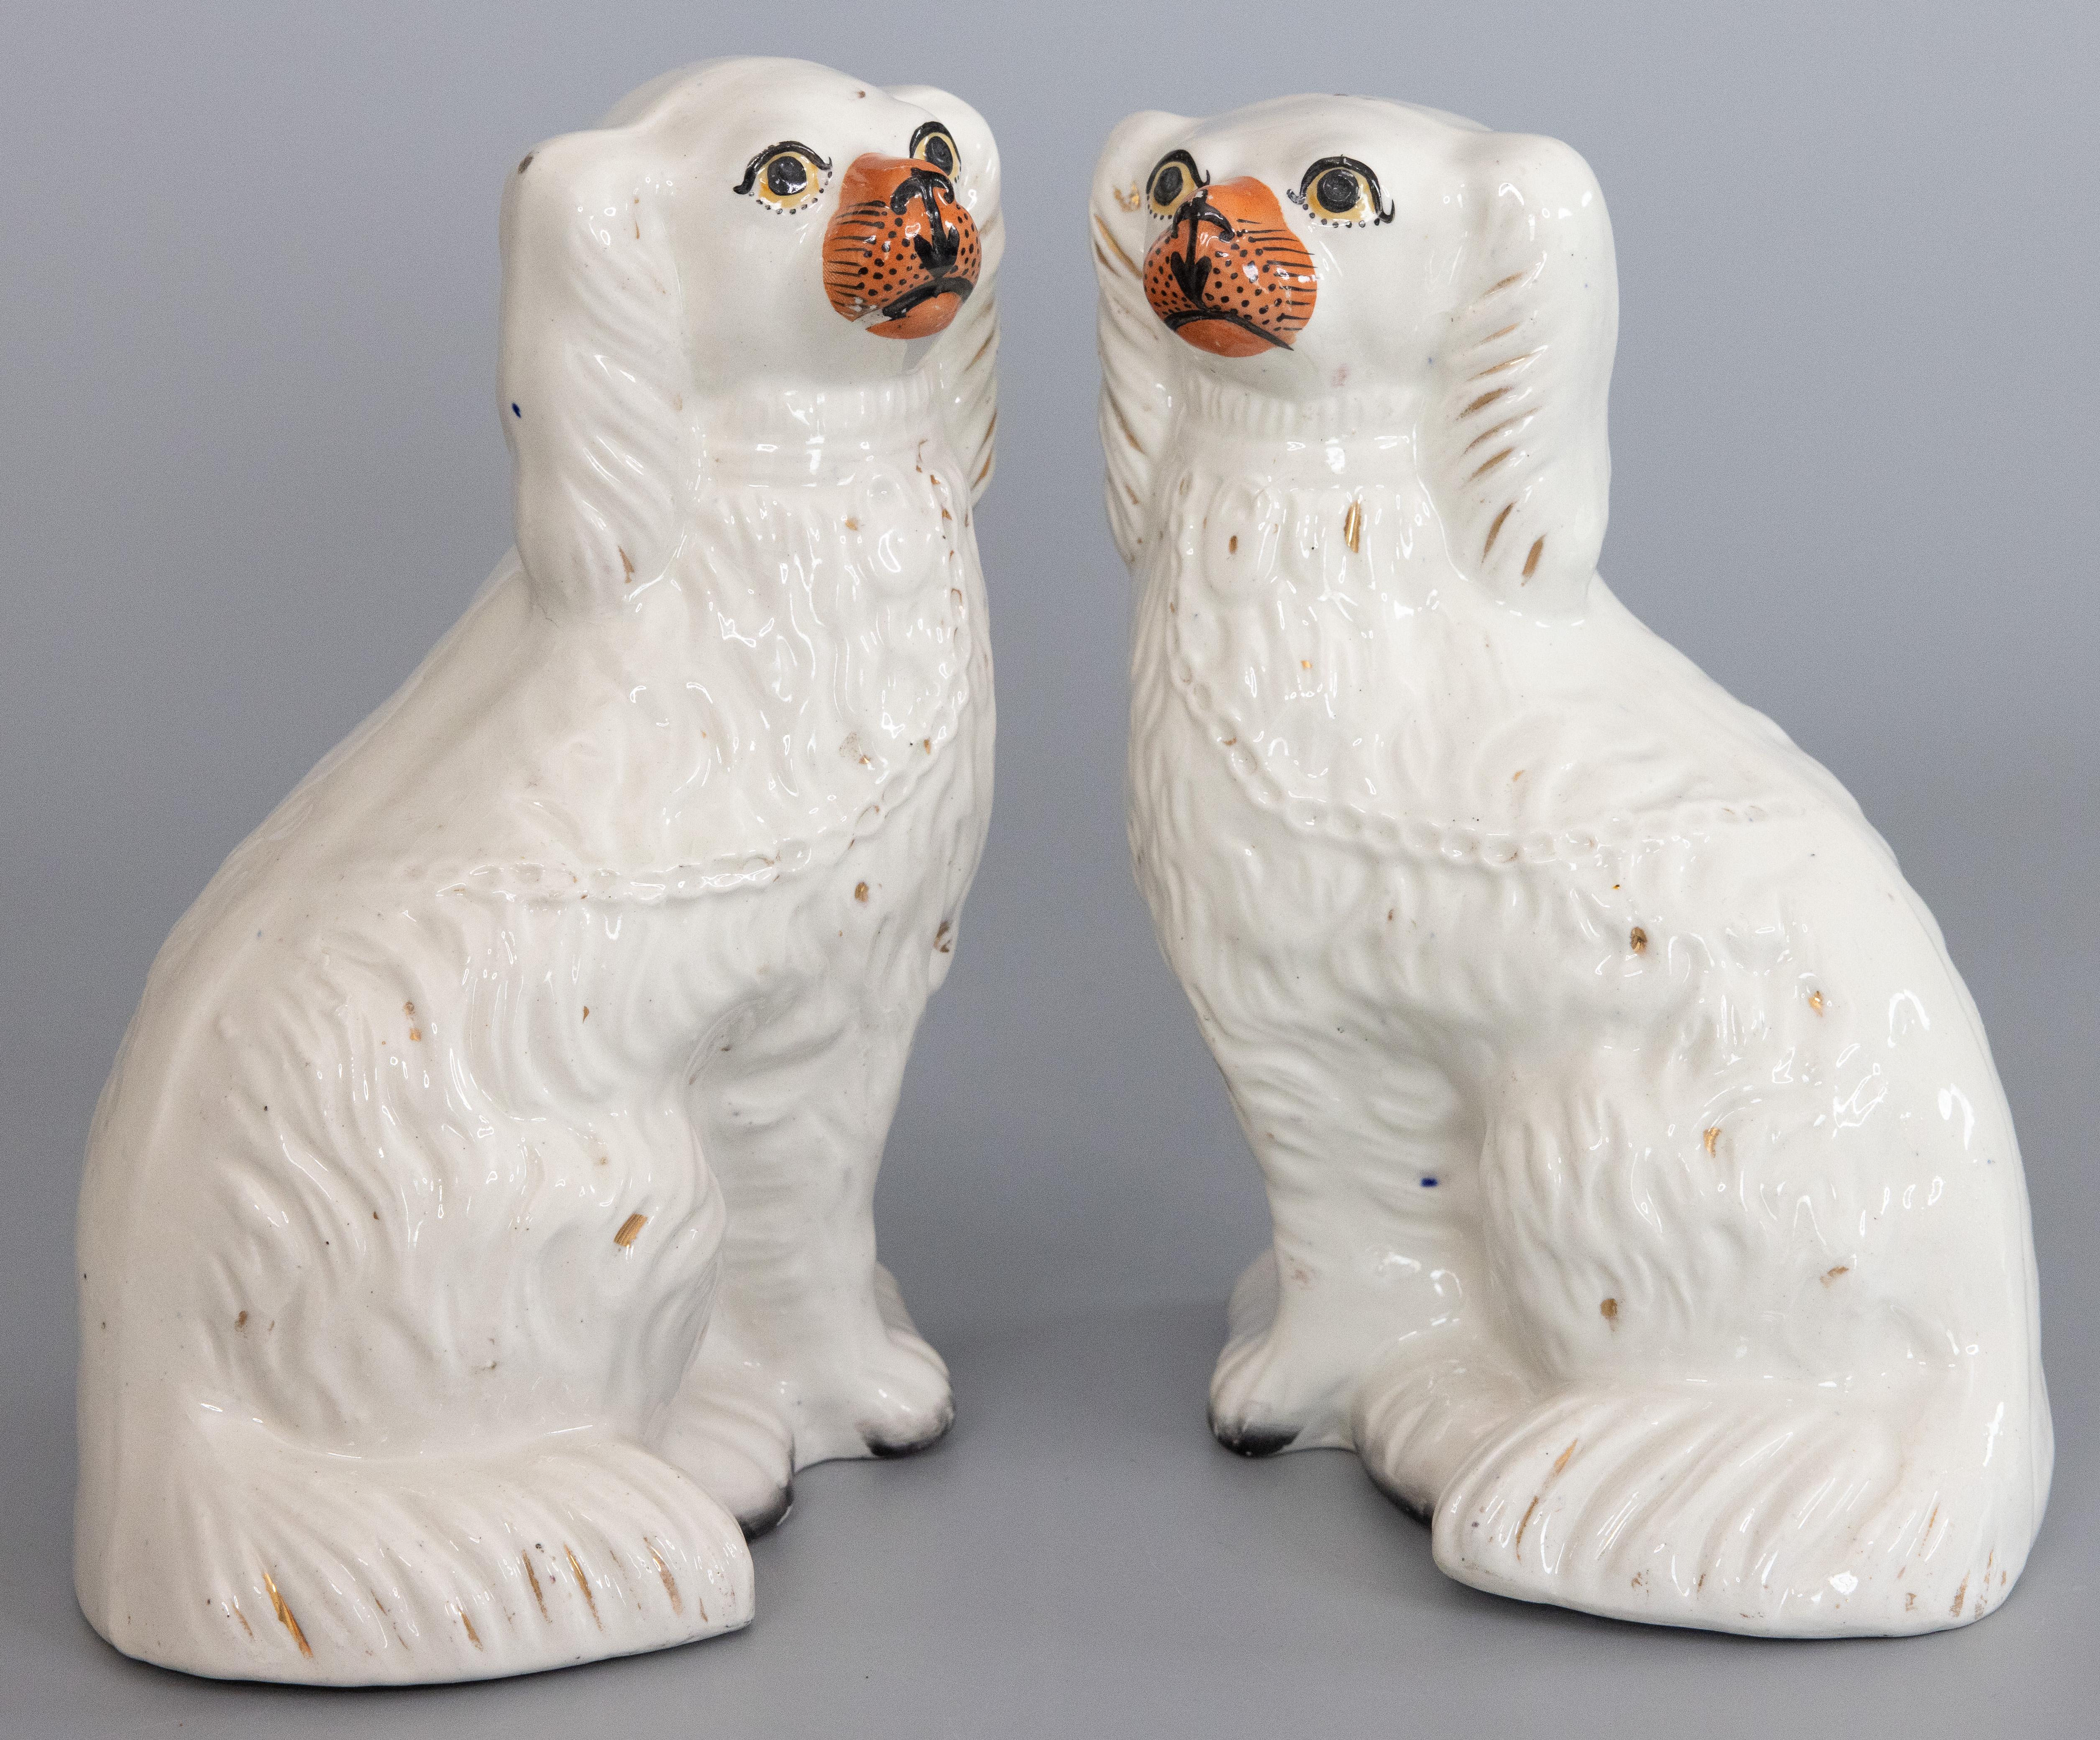 A fine pair of antique 19th-Century English Staffordshire mantel dogs. These charming dogs are hand painted with lovely gilt details and sweet faces. They are the perfect Victorian pair of dogs for your mantel, bookcase, or table.
